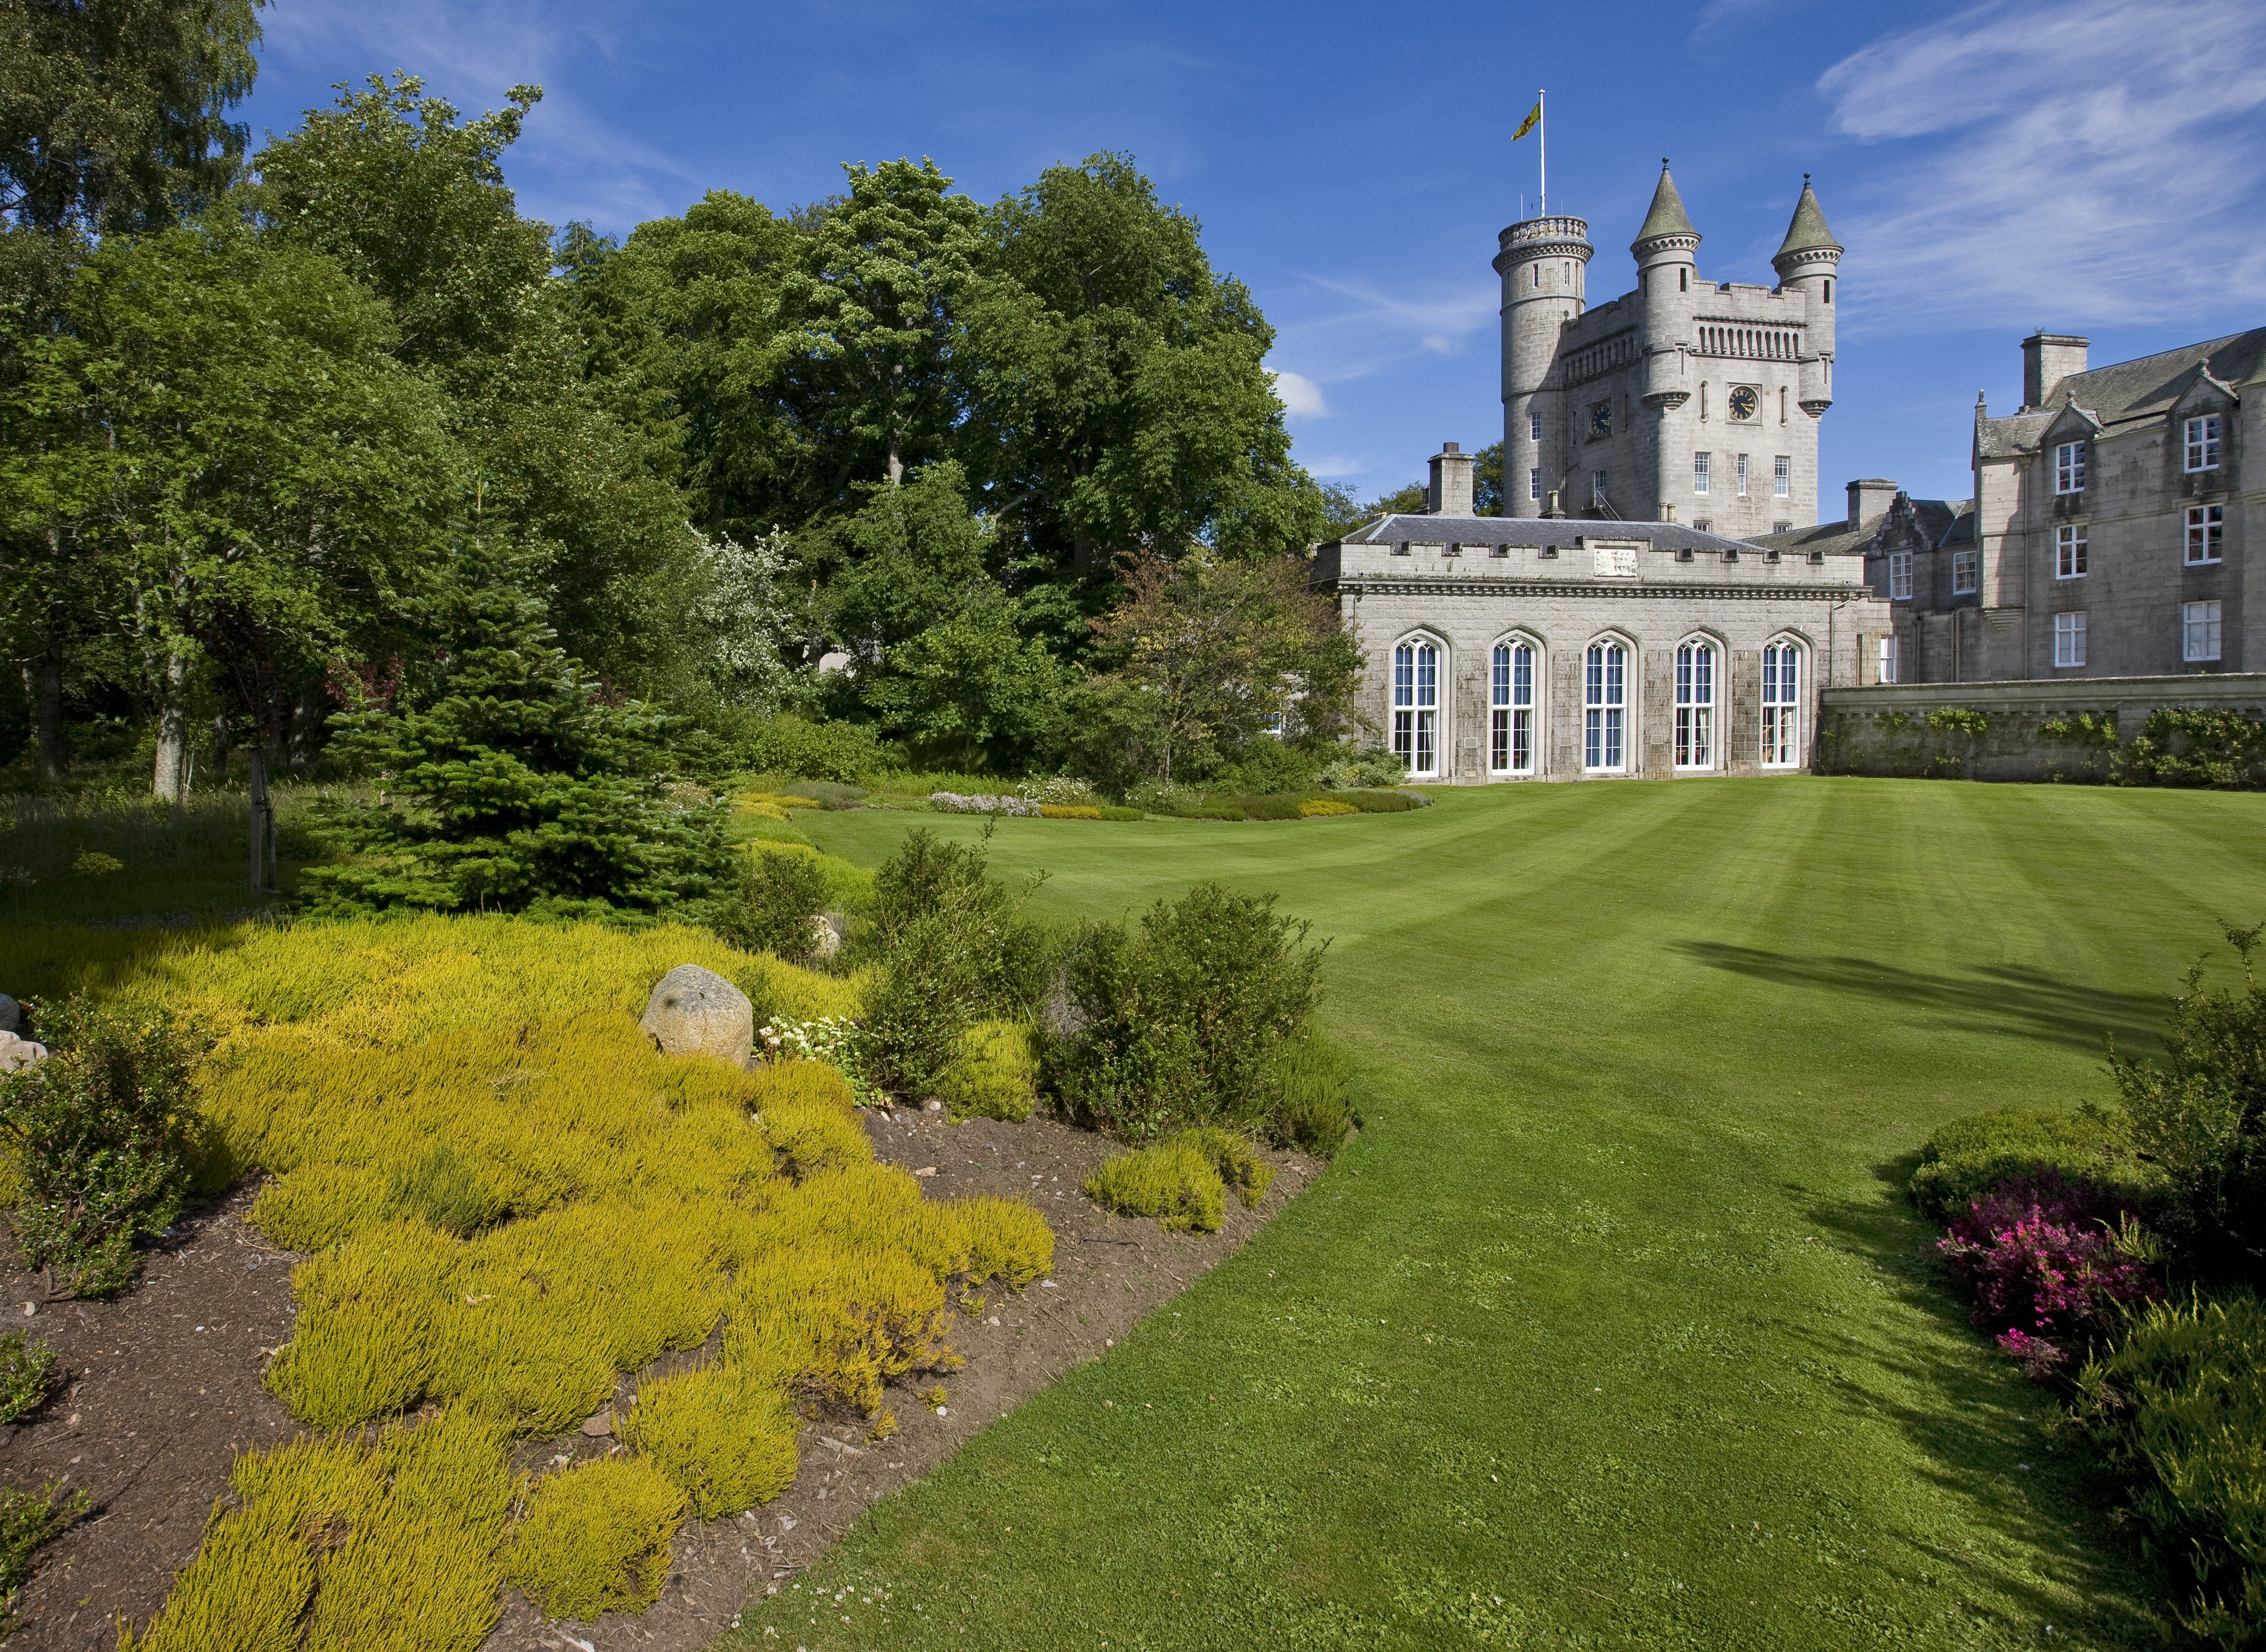 Balmoral Castle from the walled rose garden, residence of the British Royal Family, Royal Deeside, Aberdeenshire, Scotland, United Kingdom. | Source: Getty Images